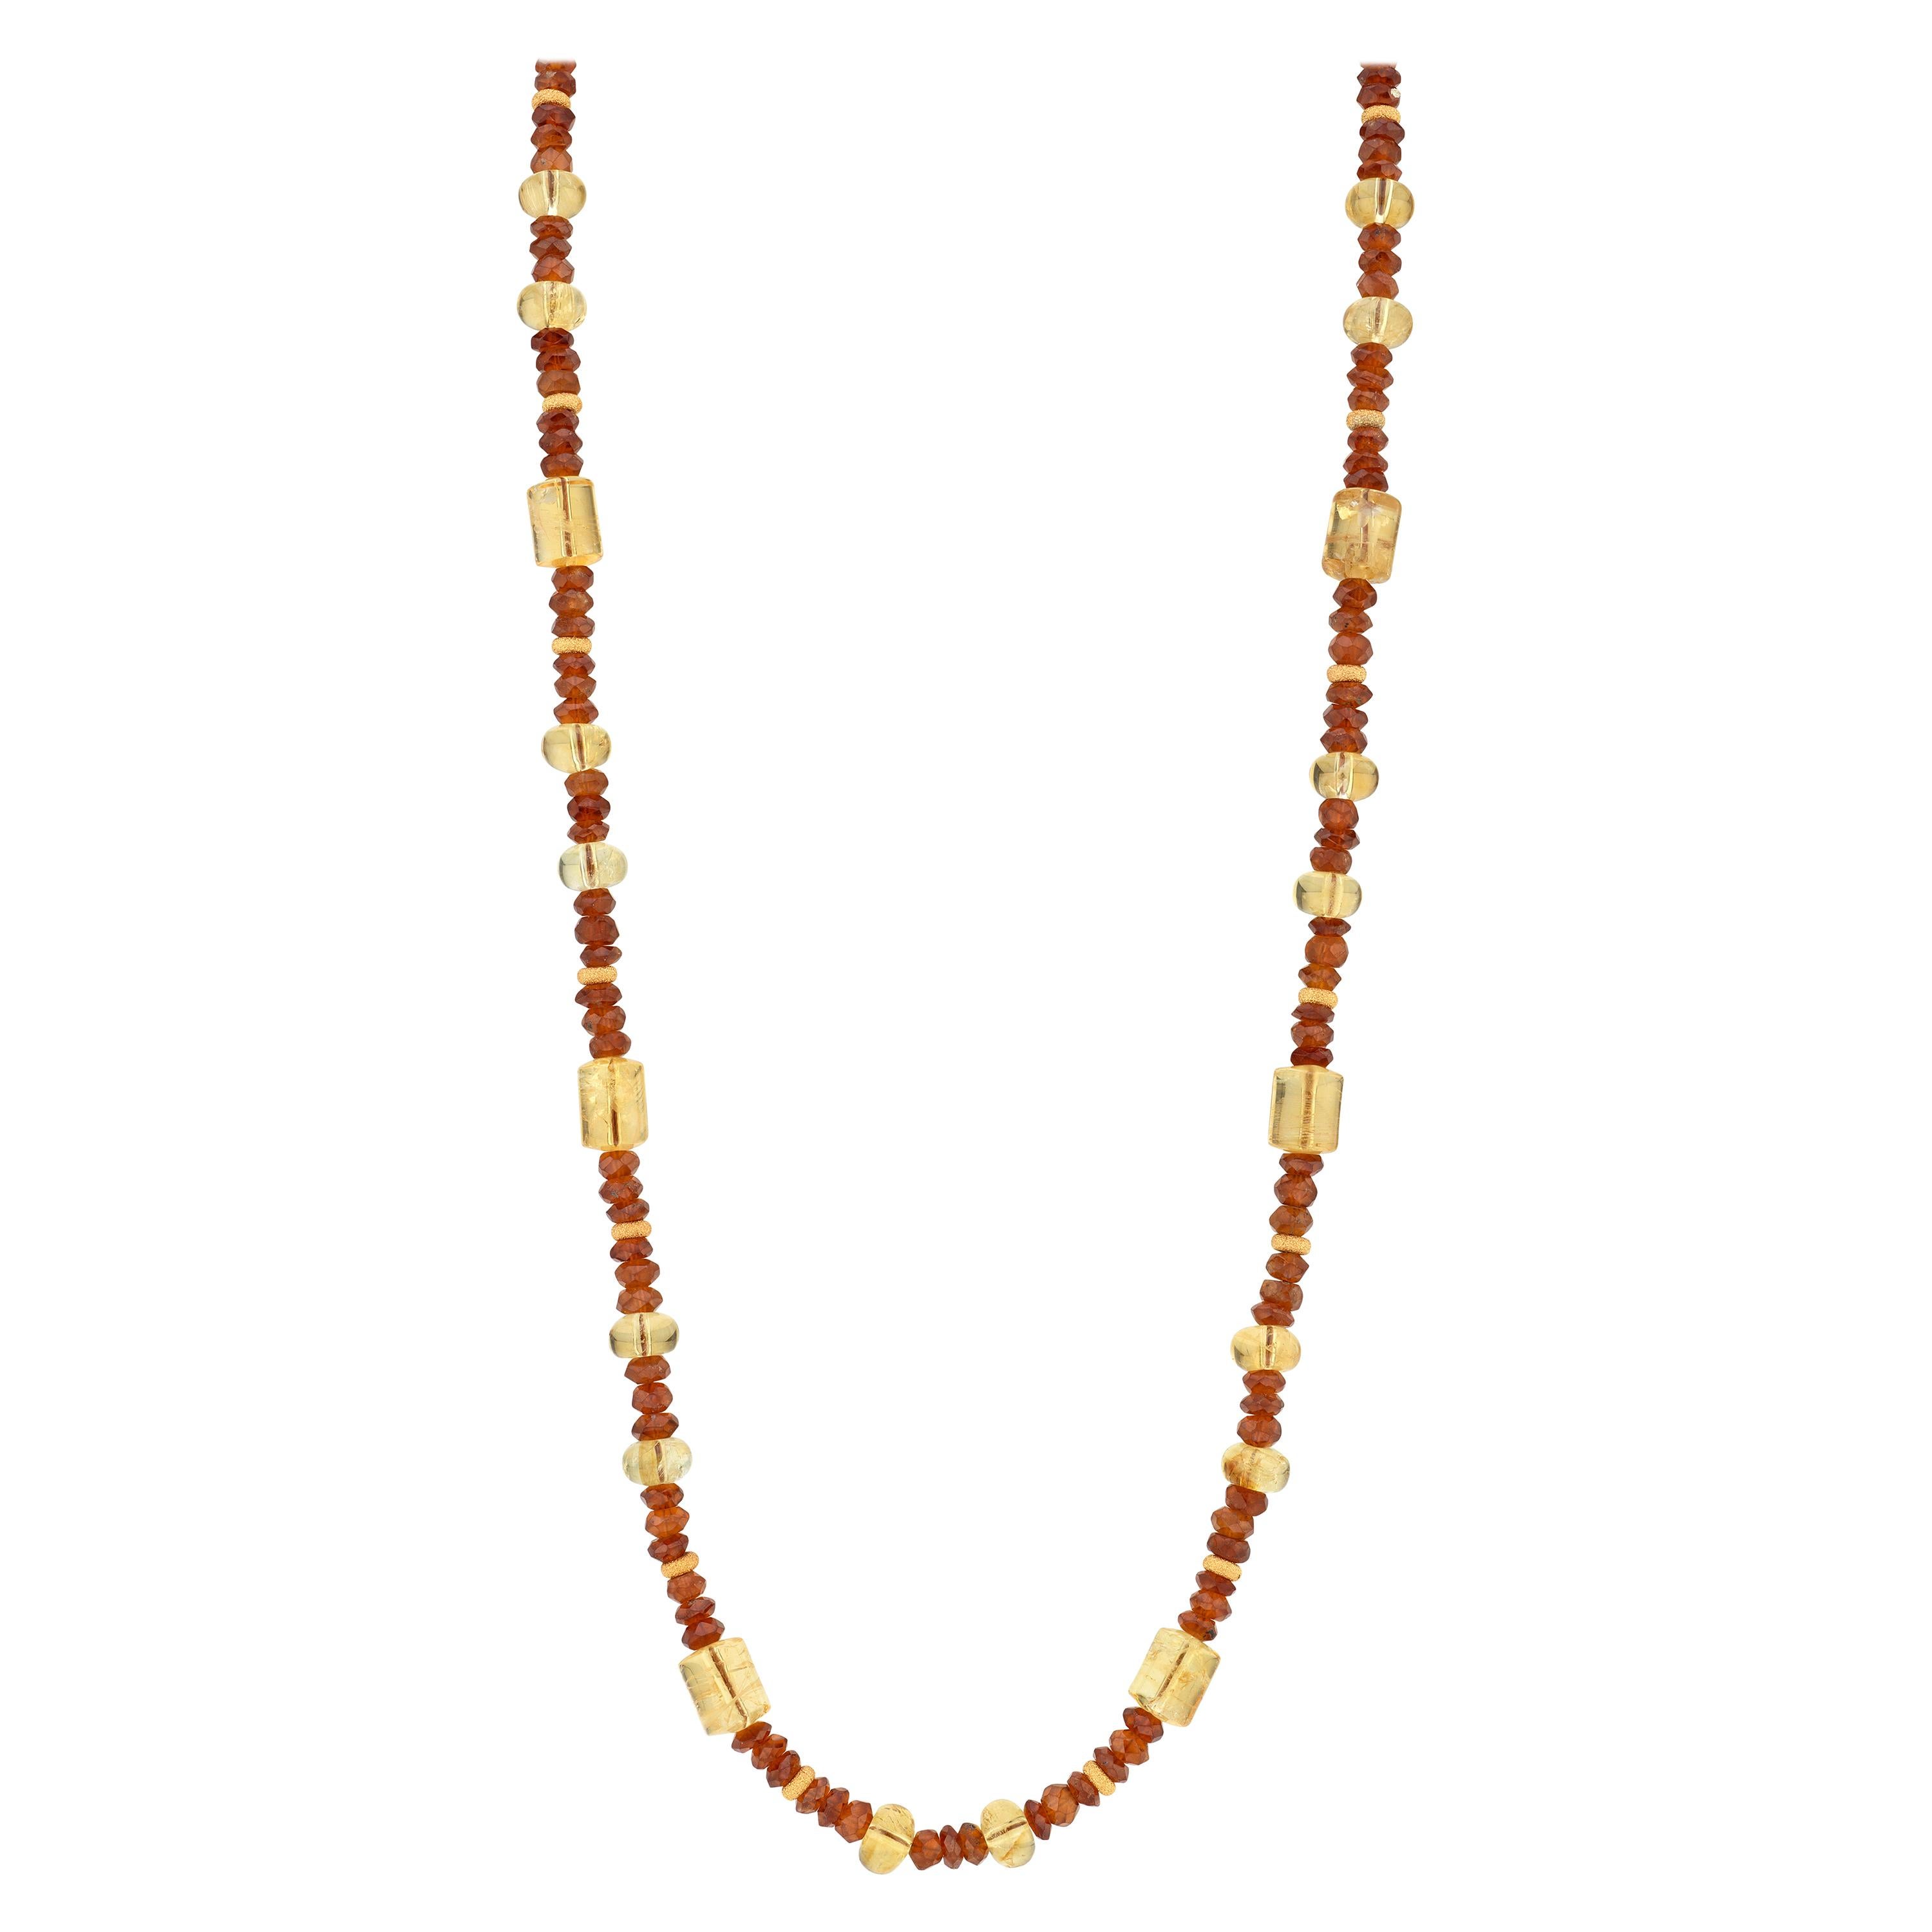 Garnet and Citrine Beaded Necklace with 14k Yellow Gold Accents